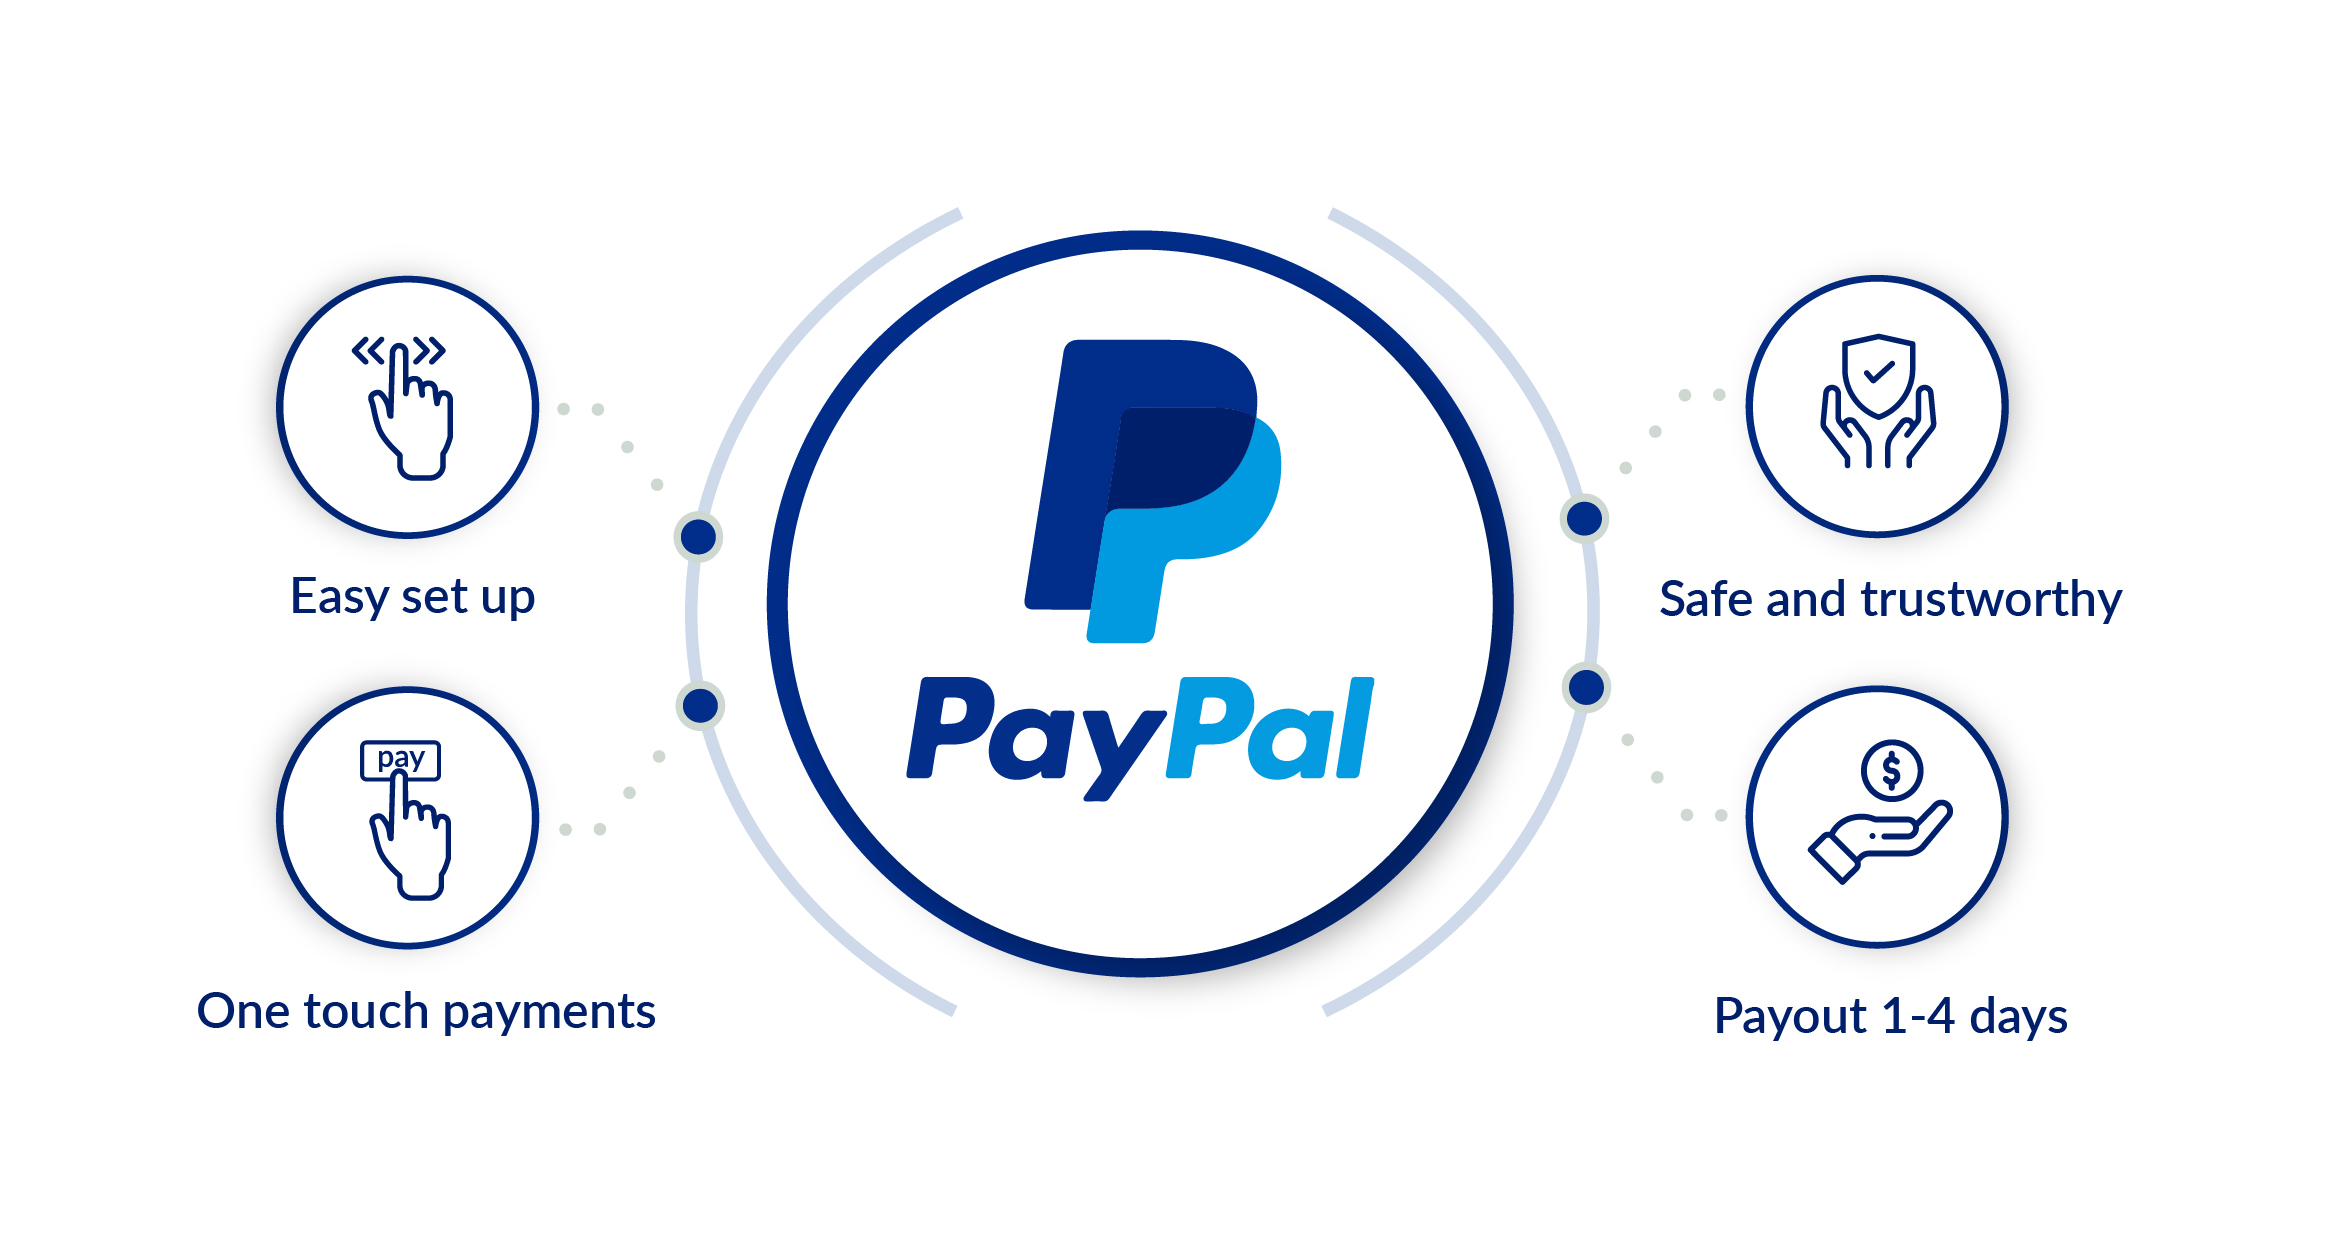 PayPal features